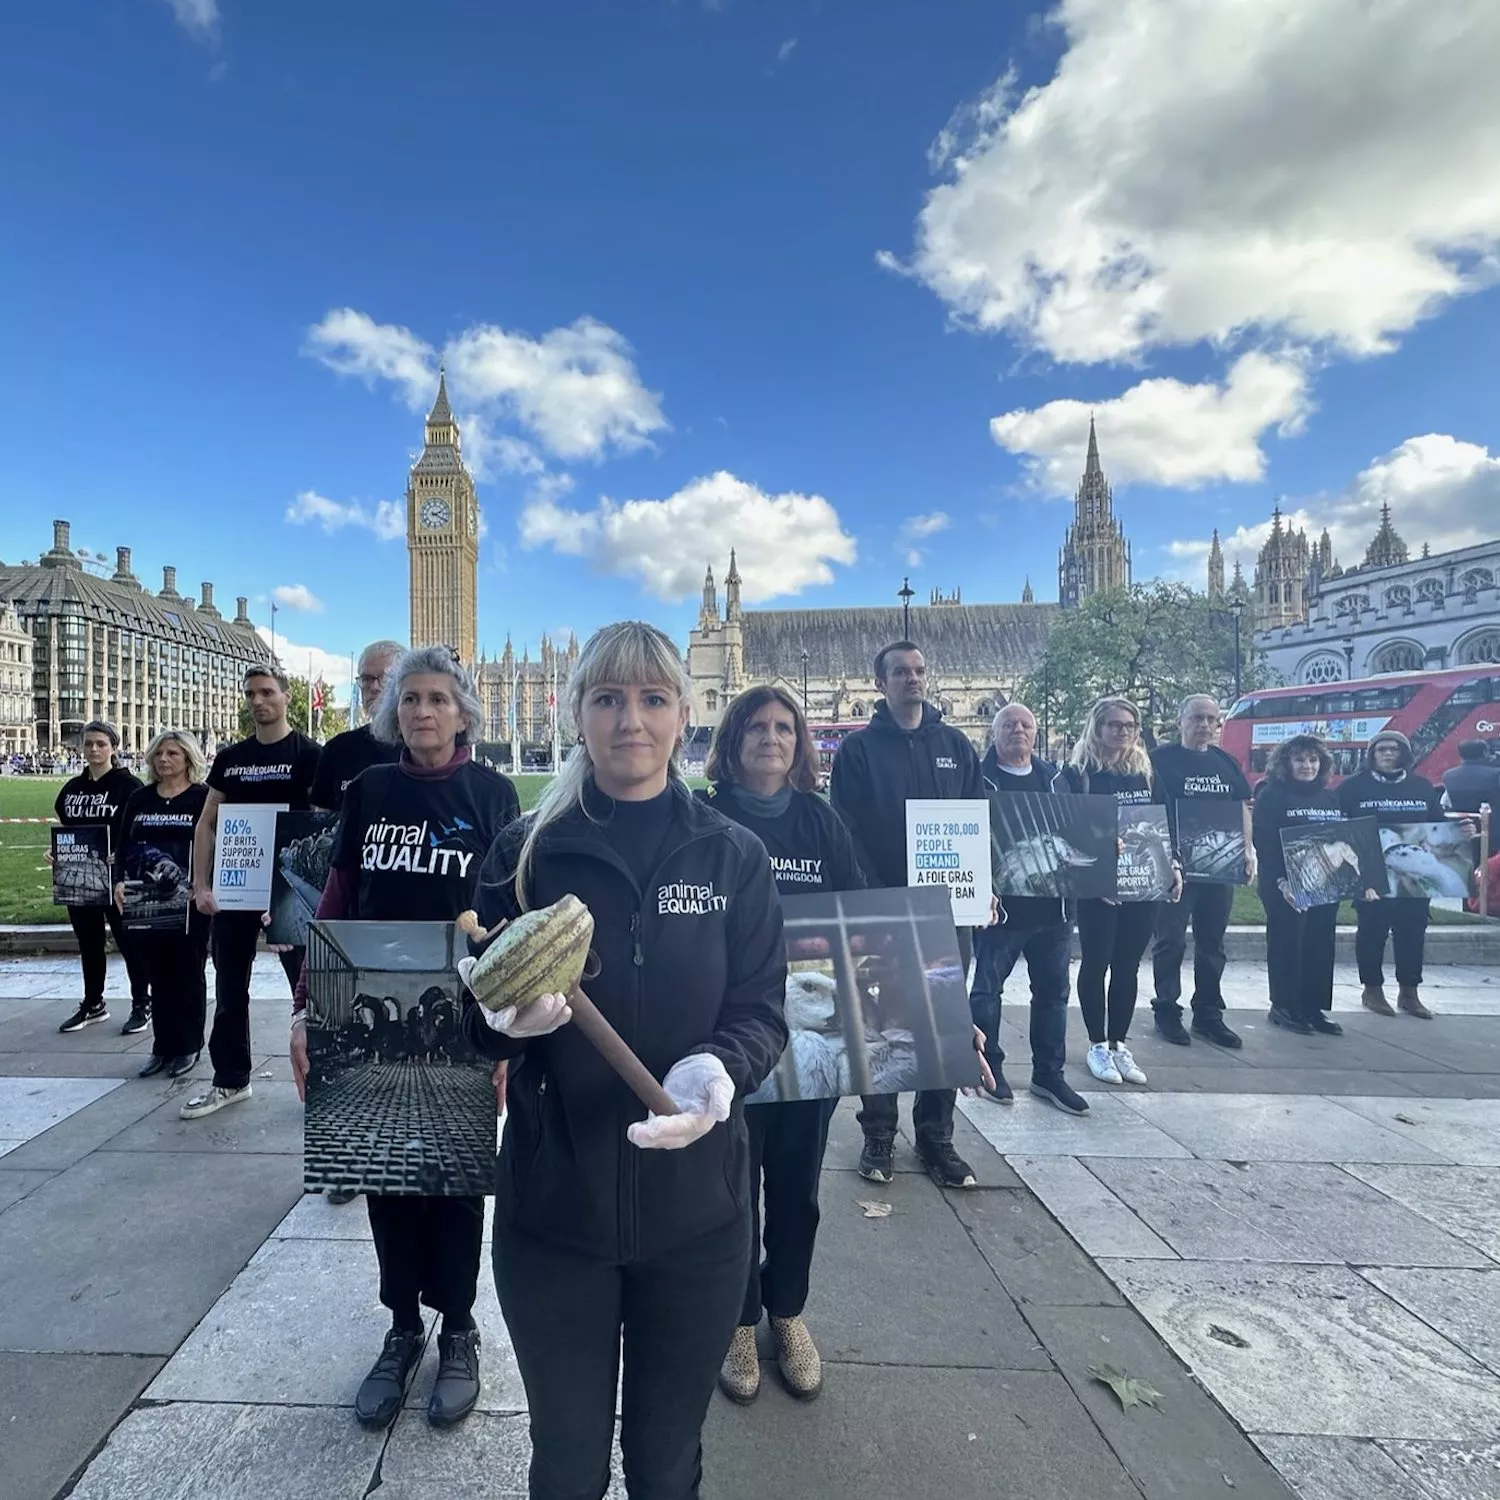 Animal Equality protest against foie gras in London.